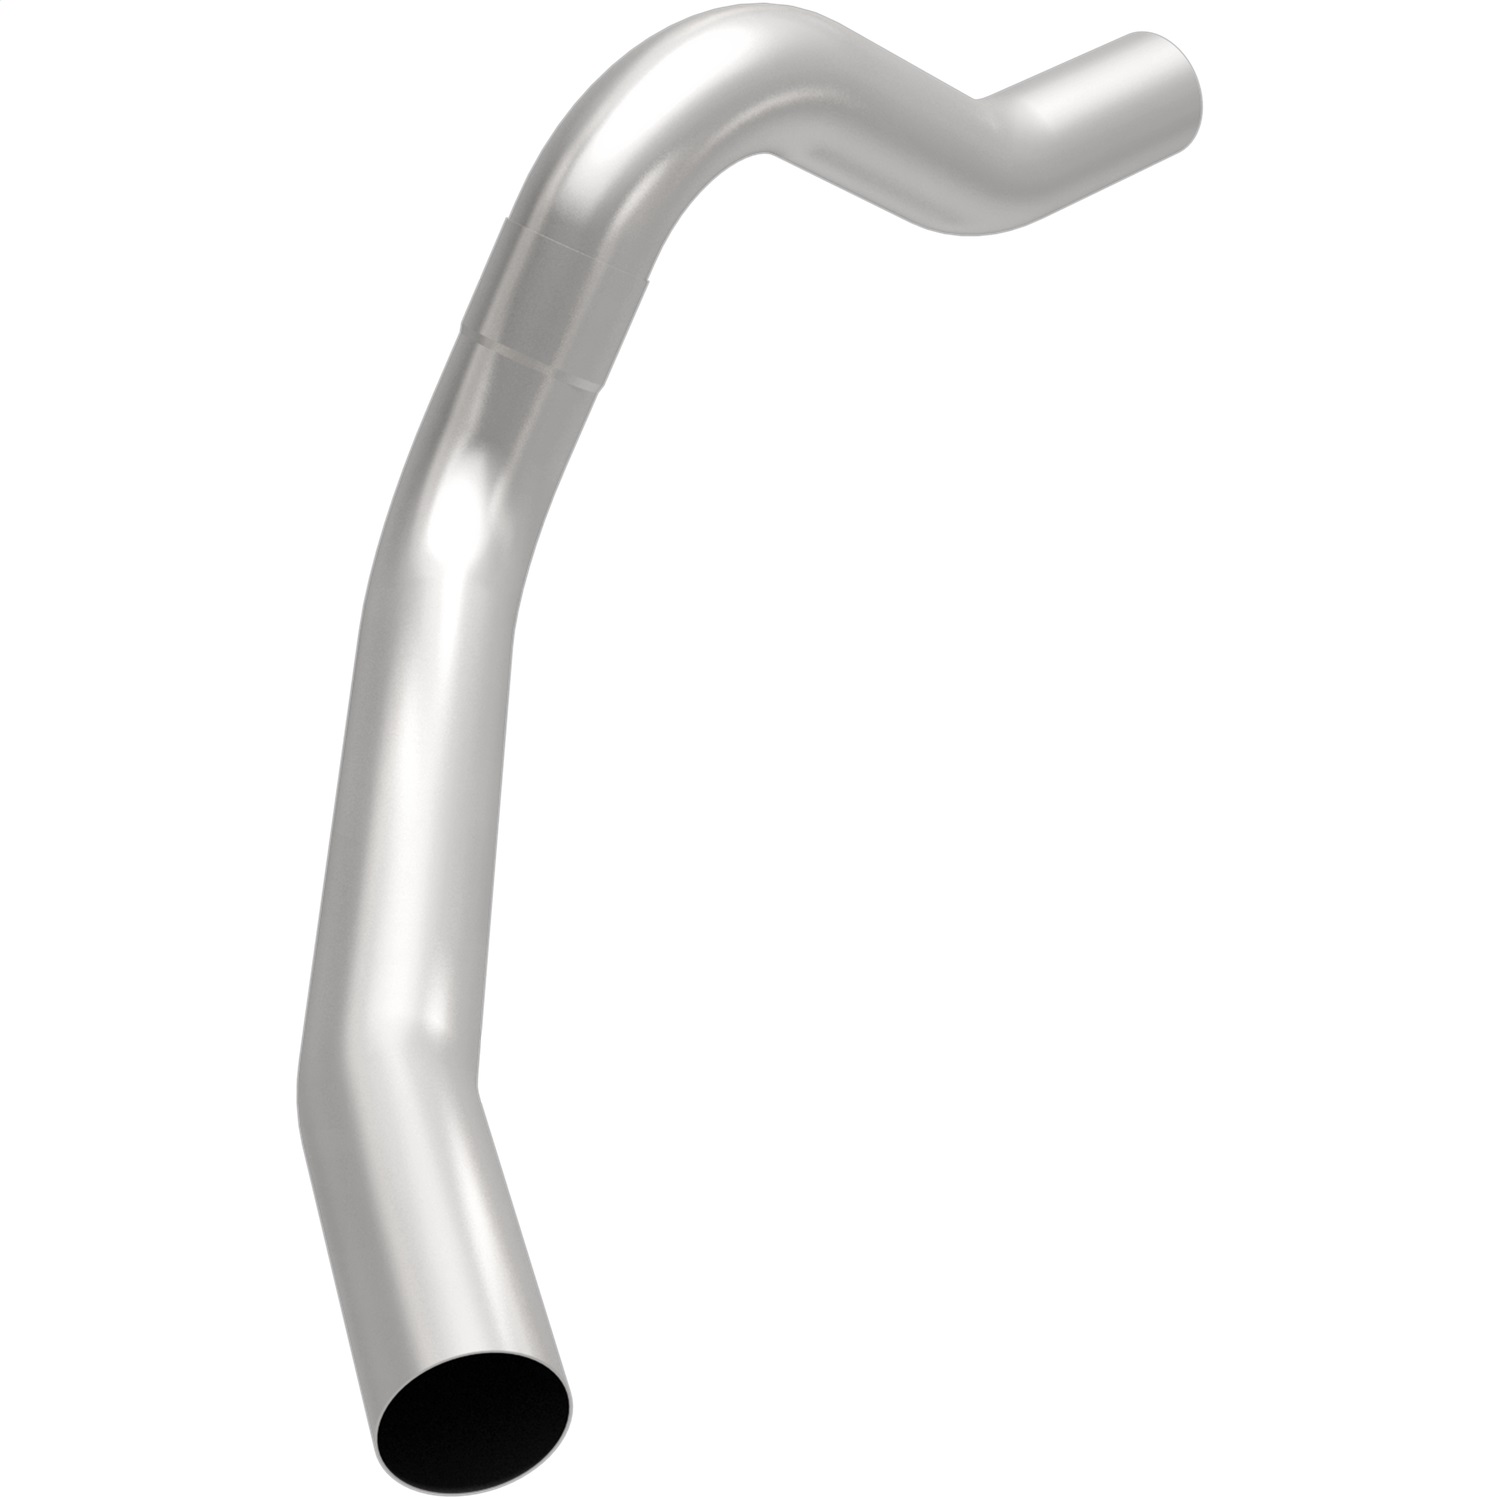 Magnaflow Performance Exhaust Magnaflow Performance Exhaust 15463 Stainless Steel; Exhaust Extension Pipe